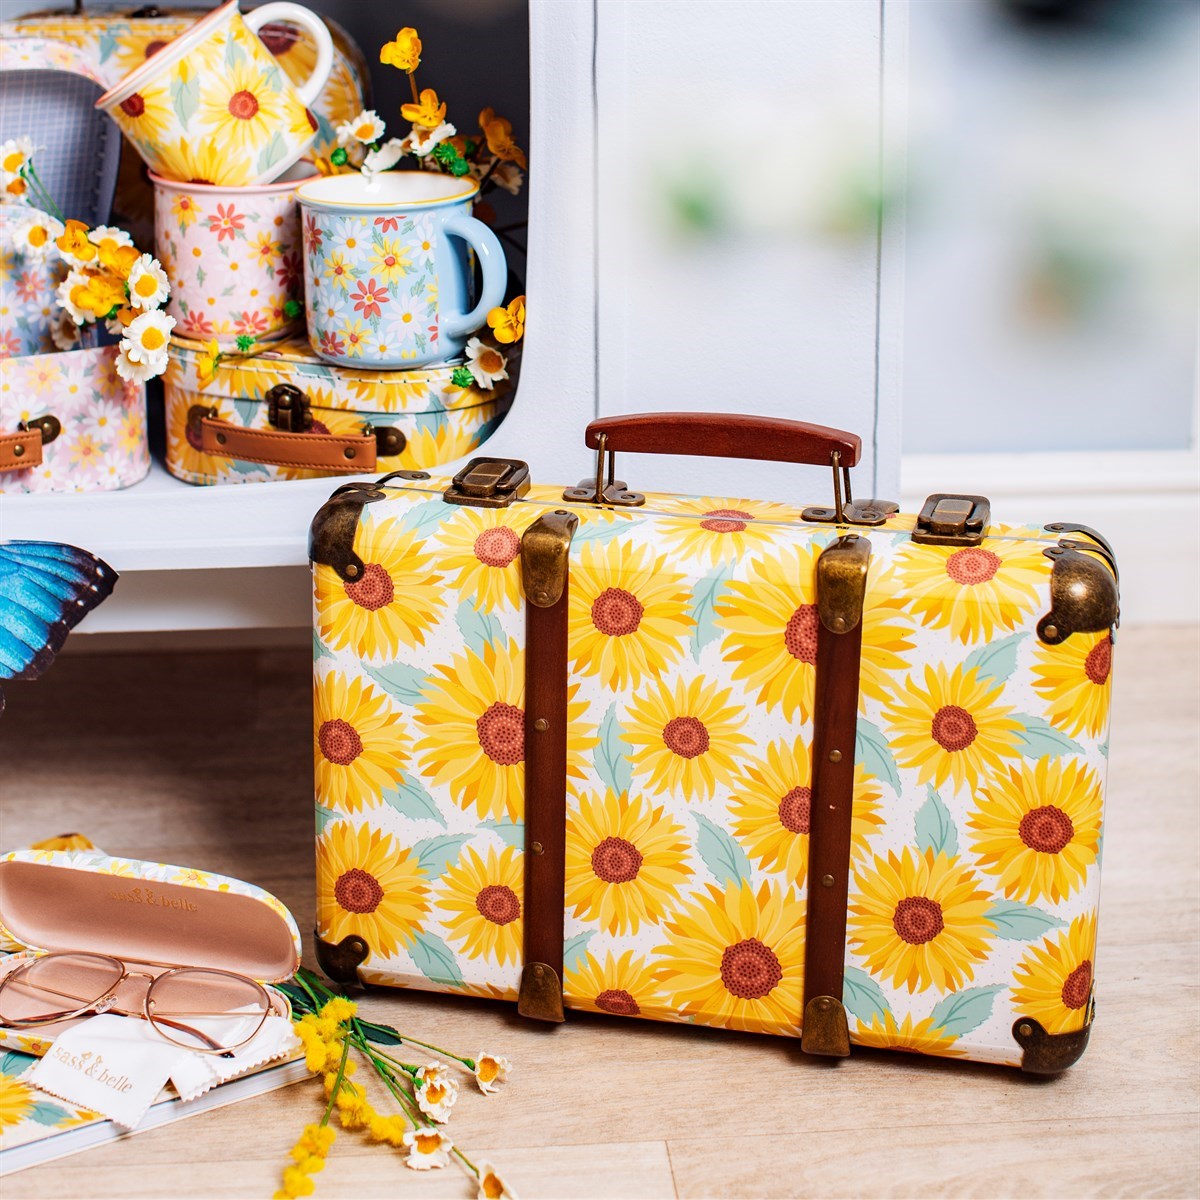 Sass & Belle Set Of 2 Small Sloth Sunflower Floral Safari Storage Suitcases 